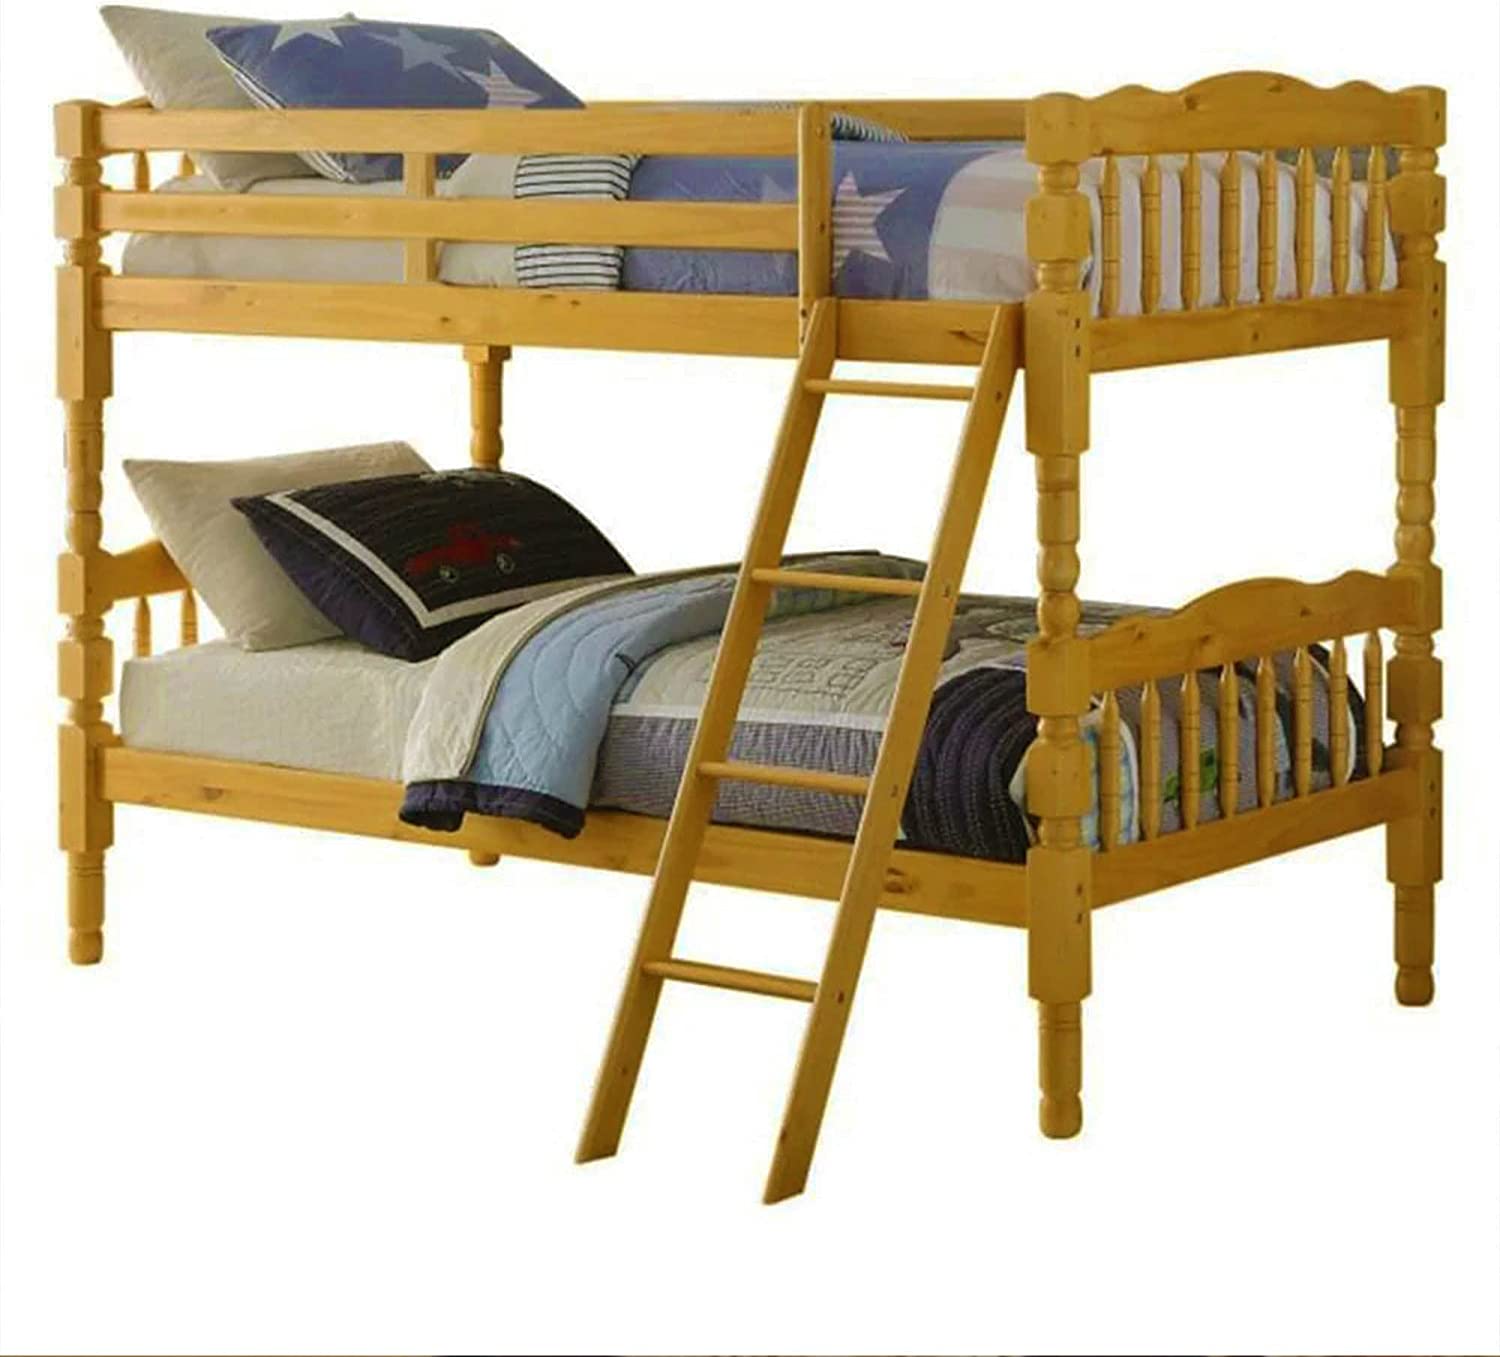 Better Home Products Charlotte Twin Over Twin Solid Wood Bunk Bed in Natural